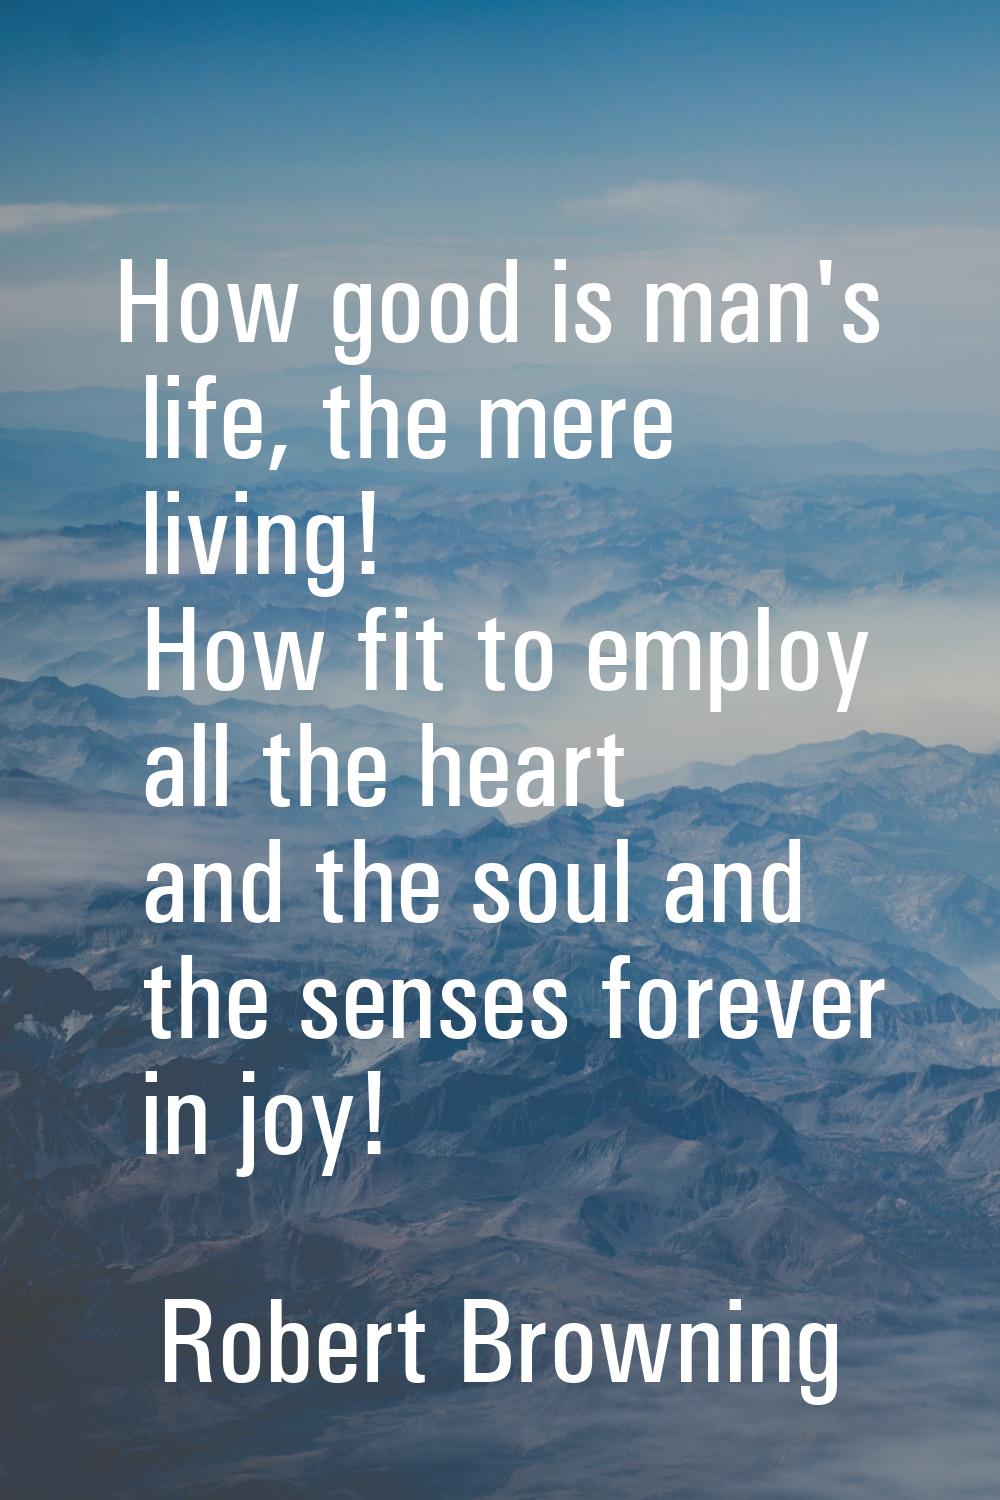 How good is man's life, the mere living! How fit to employ all the heart and the soul and the sense